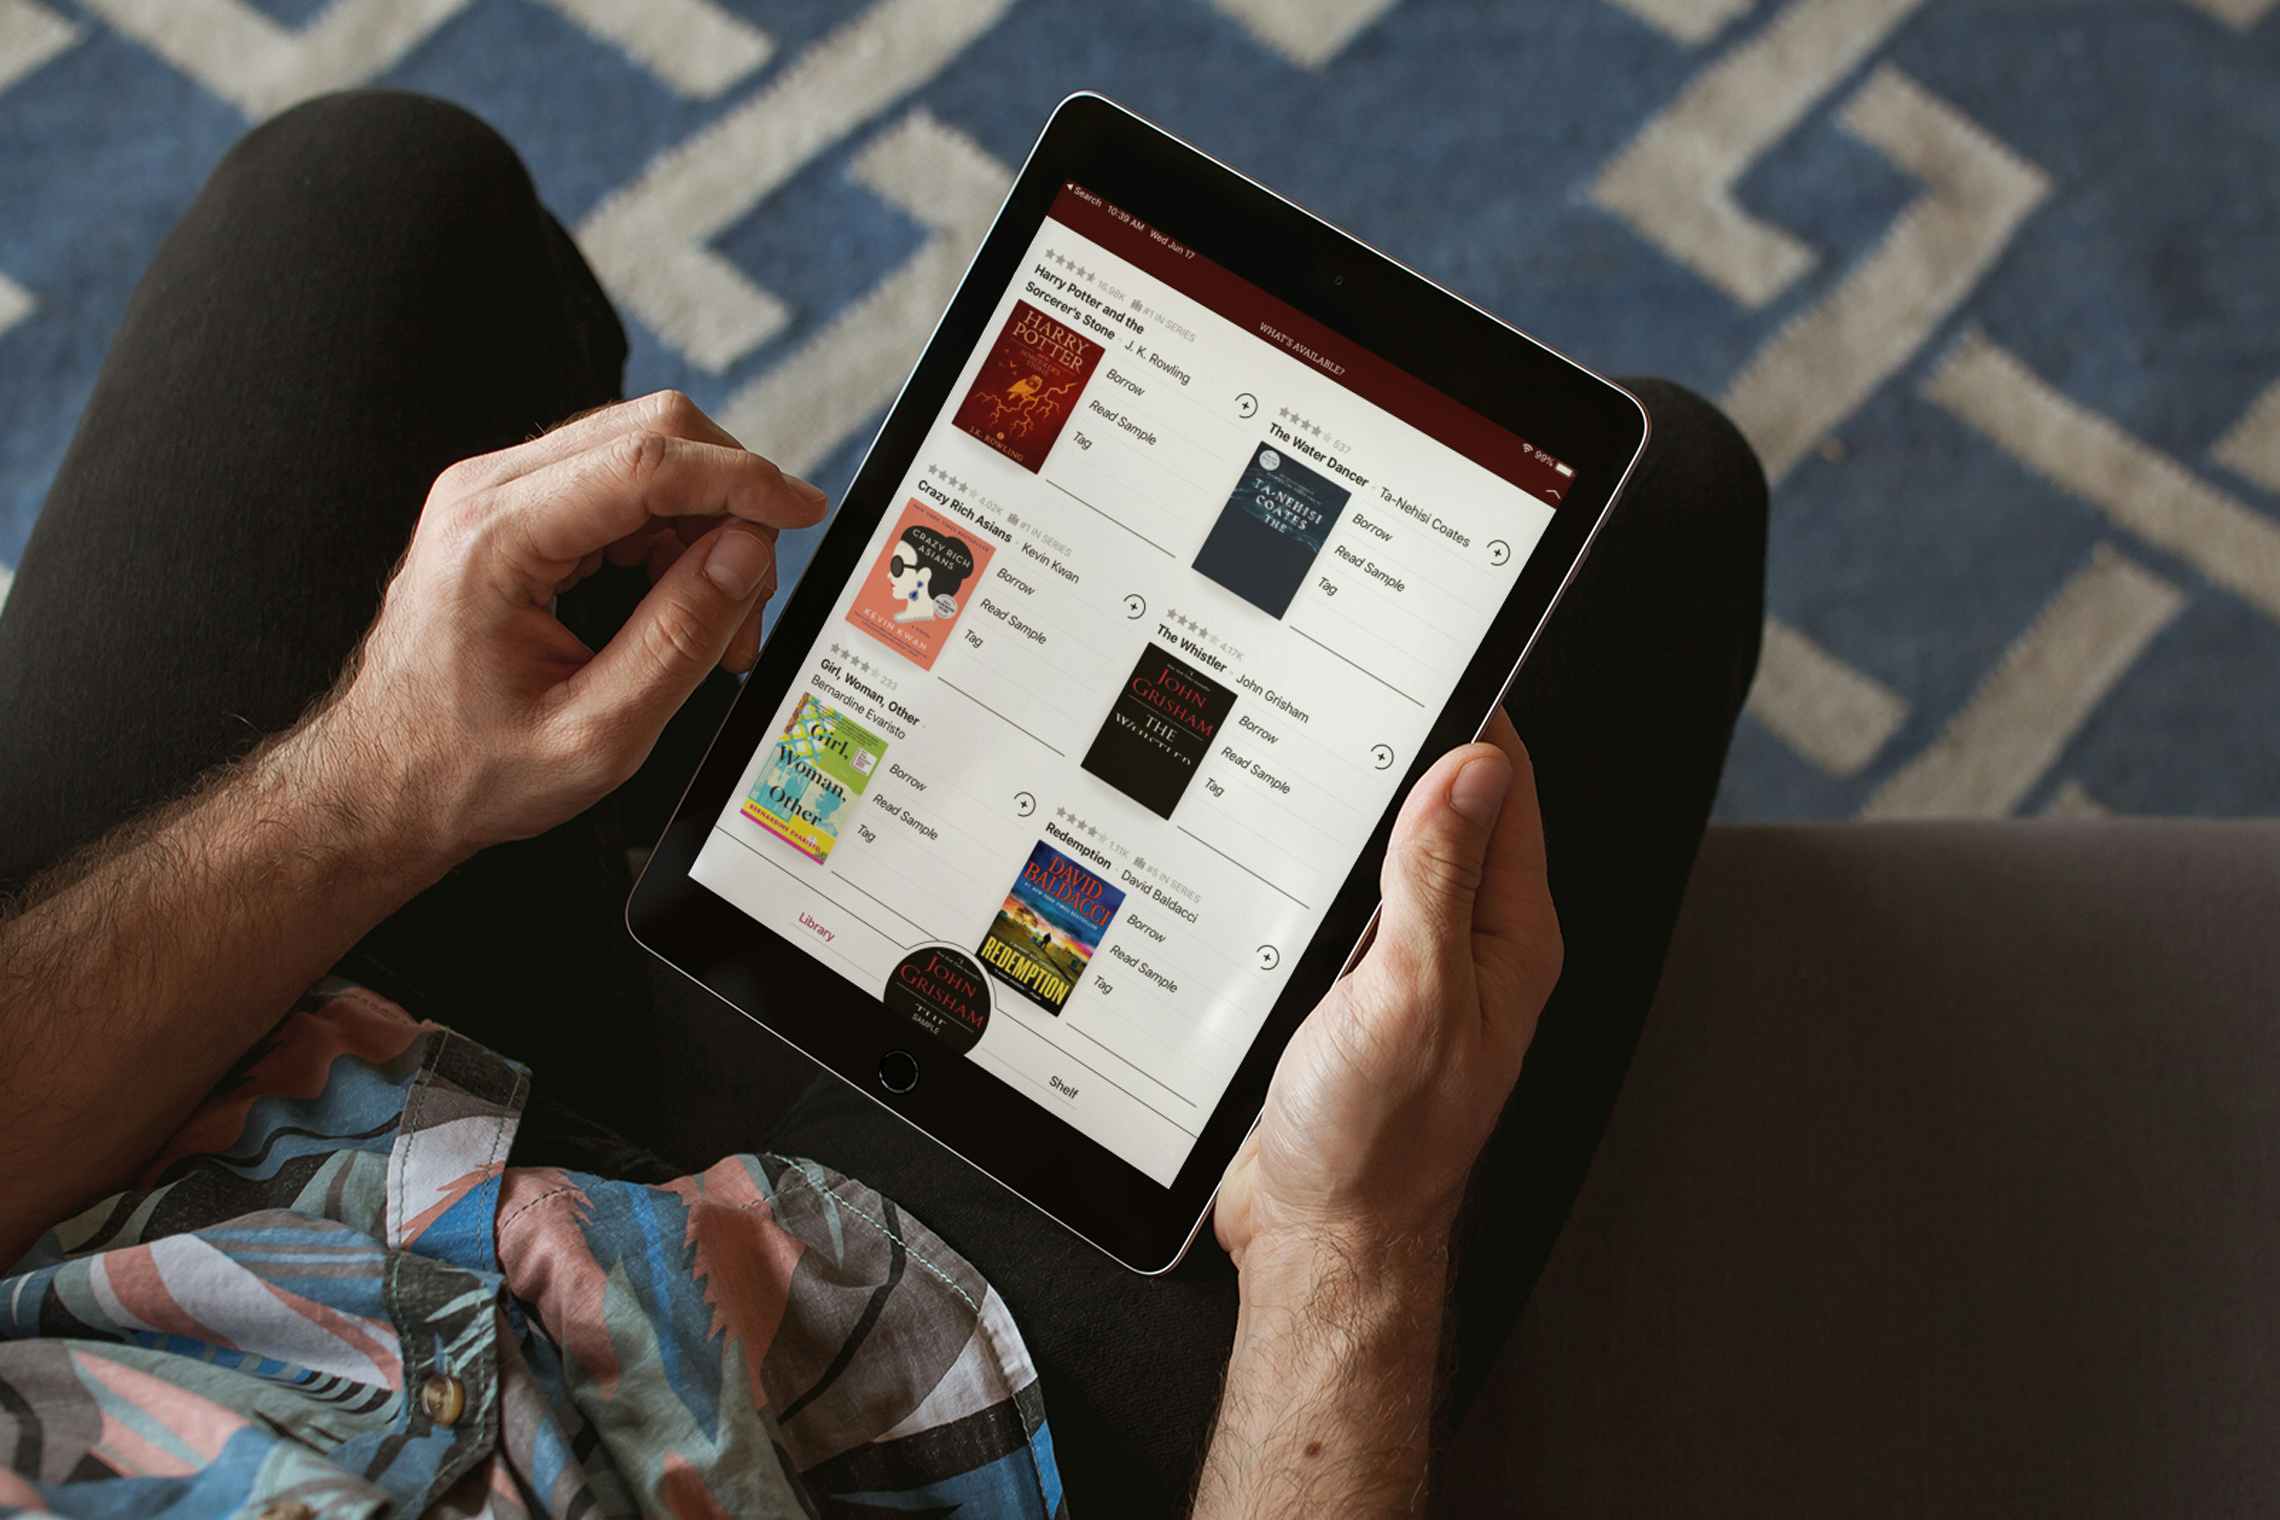 A man sitting on a couch looking at an ipad with a digital library app open on the screen.